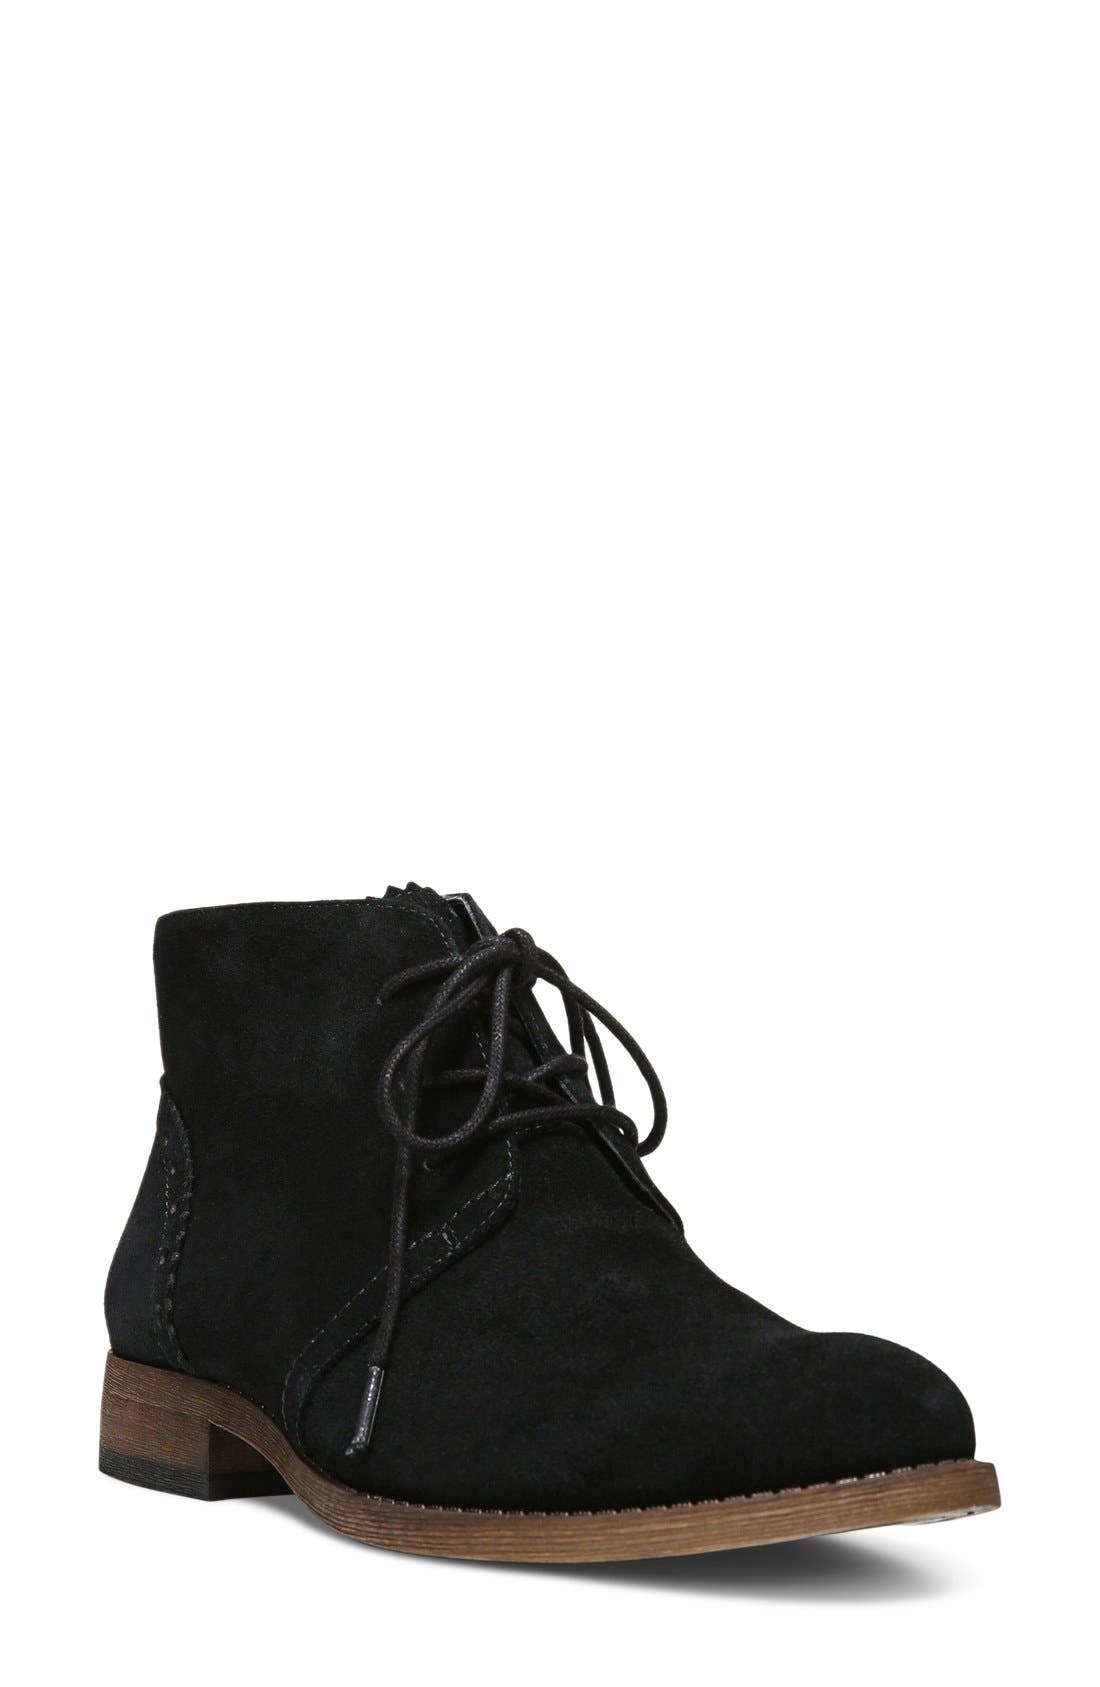 franco sarto lace up booties